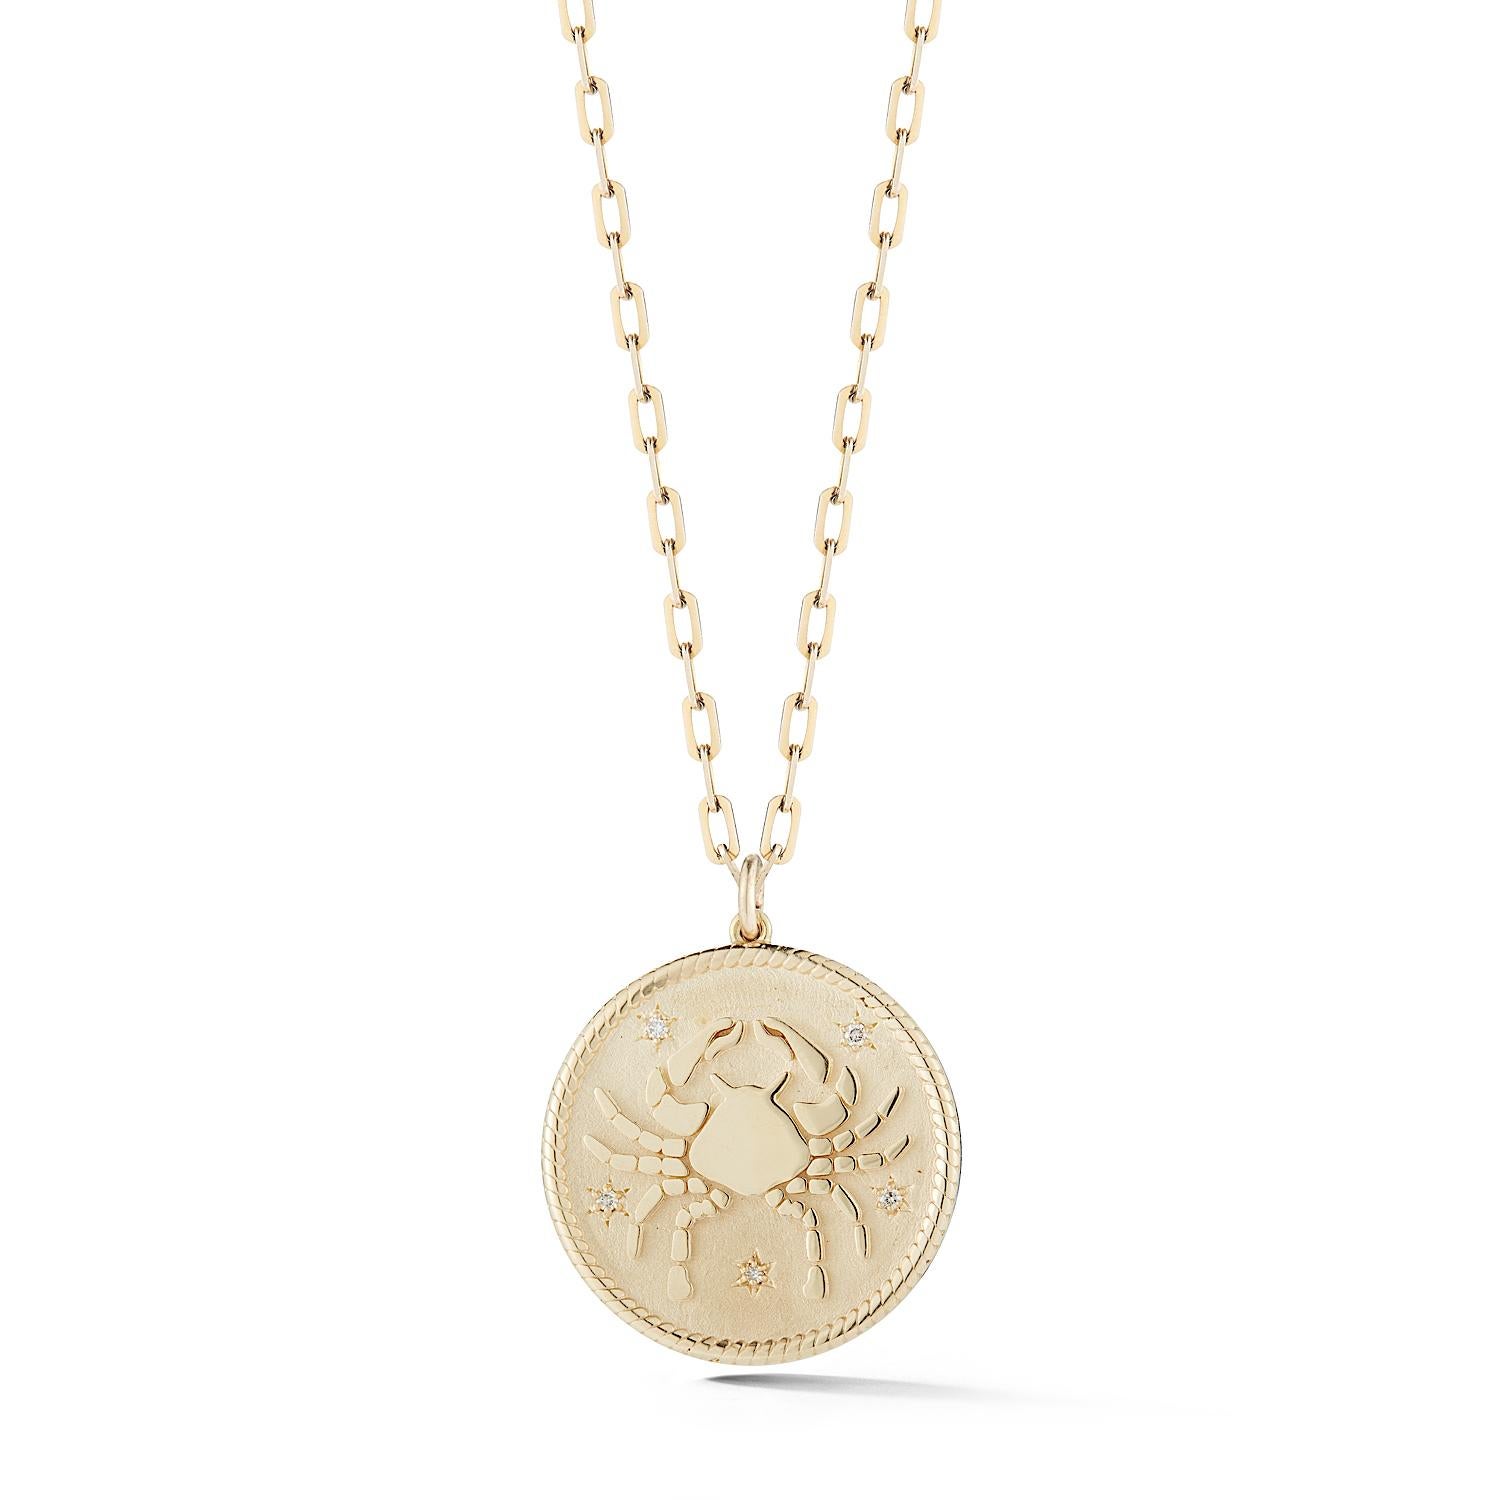 Garland Collection Diamond and Gold Leo Zodiac Medallion For Sale 9